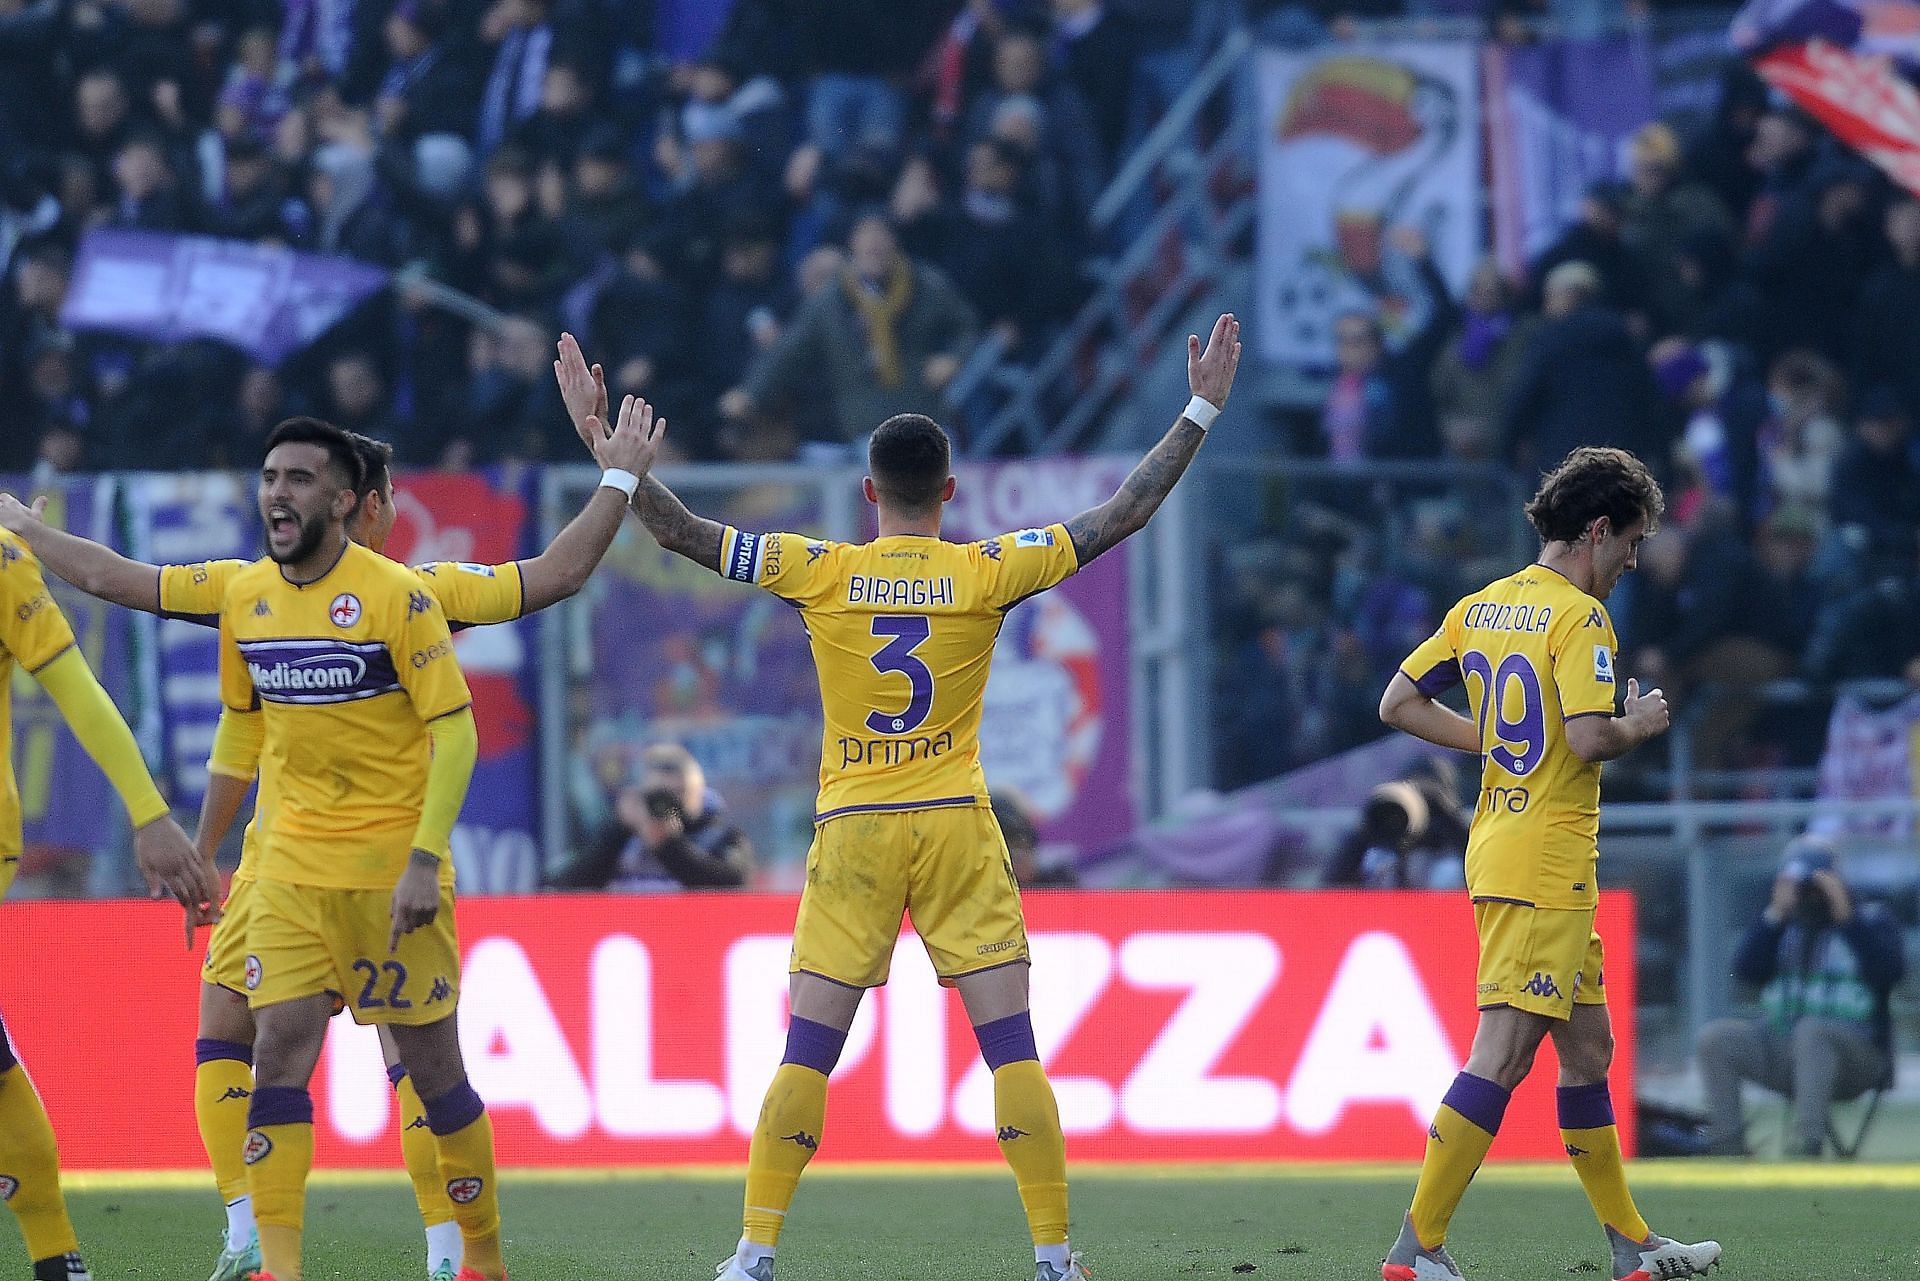 Fiorentina host last-placed Salernitana in their upcoming Serie A fixture on Saturday